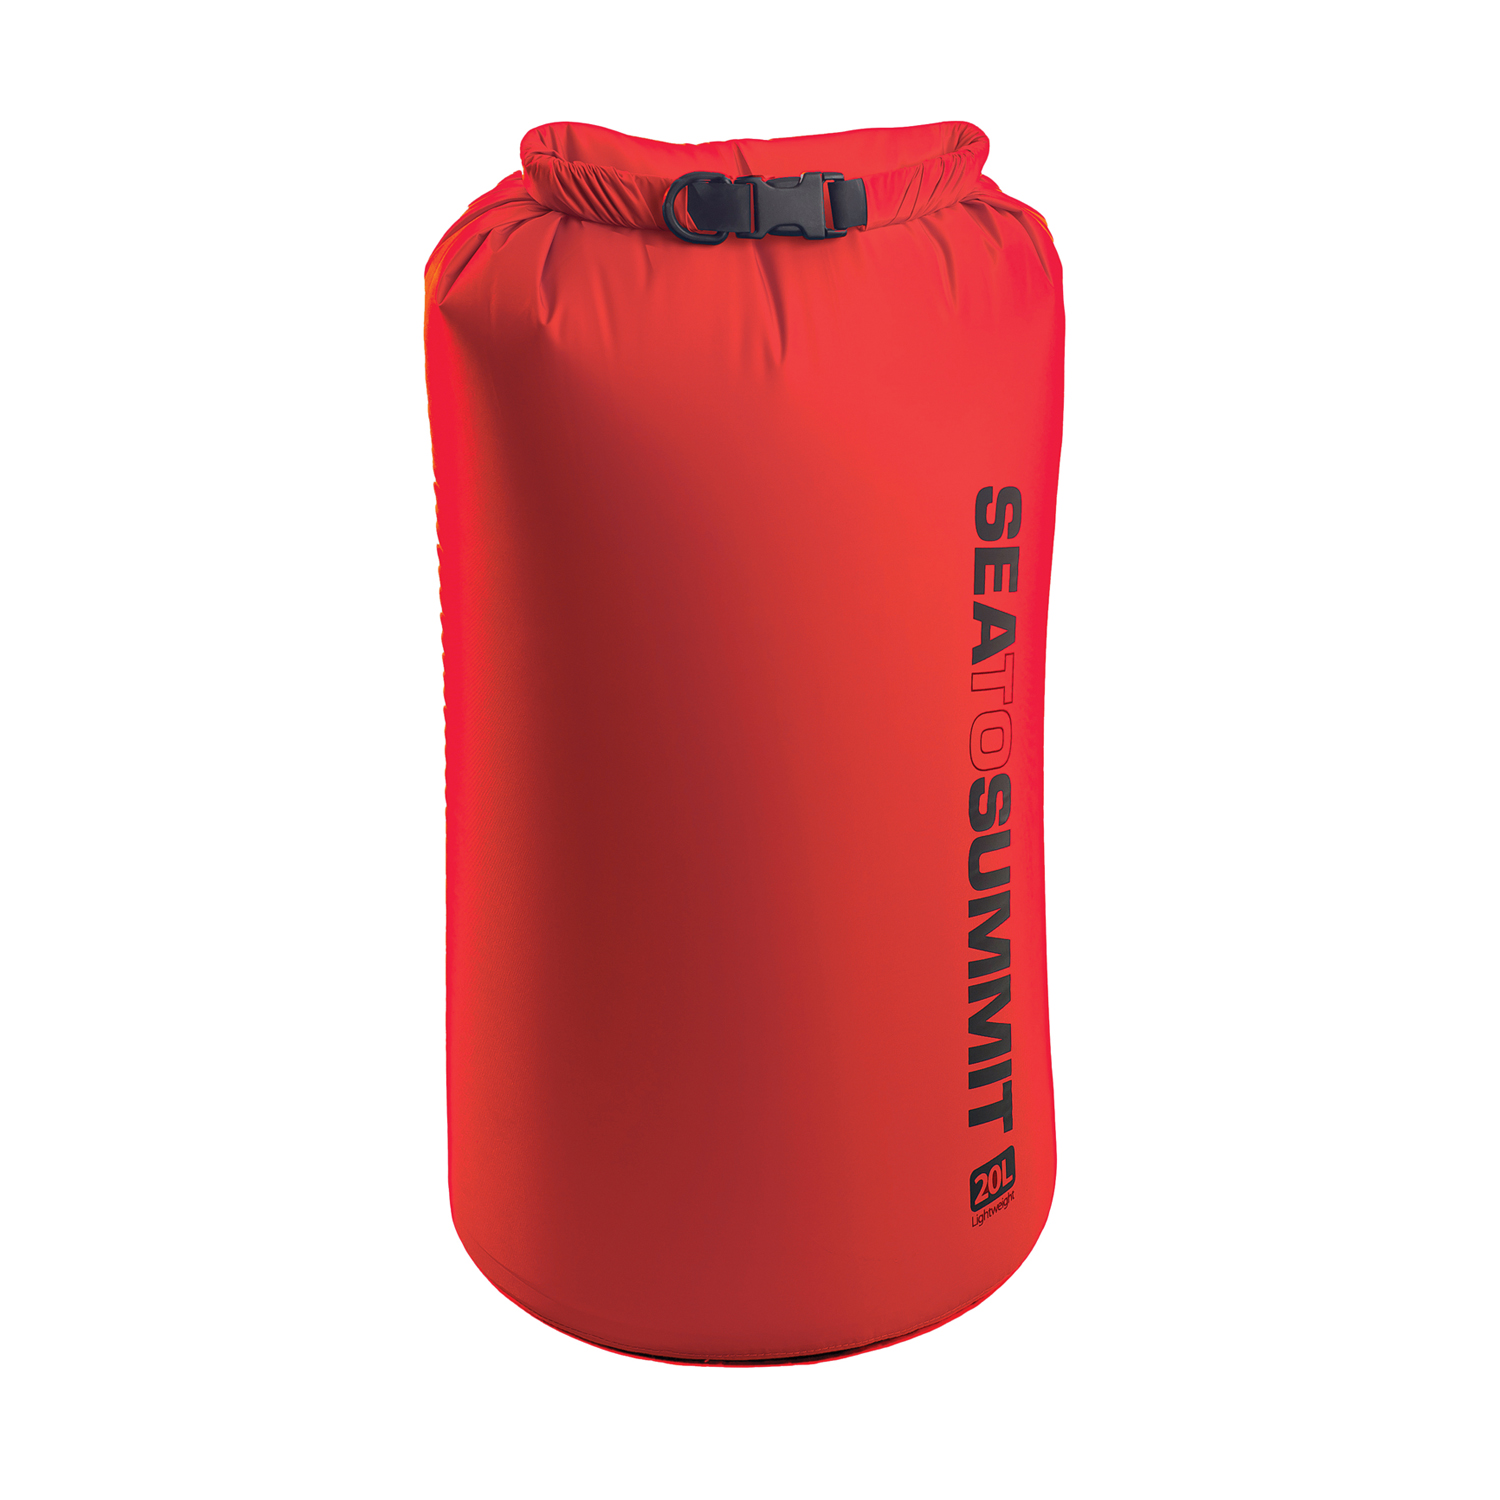 WATERPROOF FABRIC SEA TO SUMMIT DRY SACK 20 LITRE RED  70 D nylon fabric 